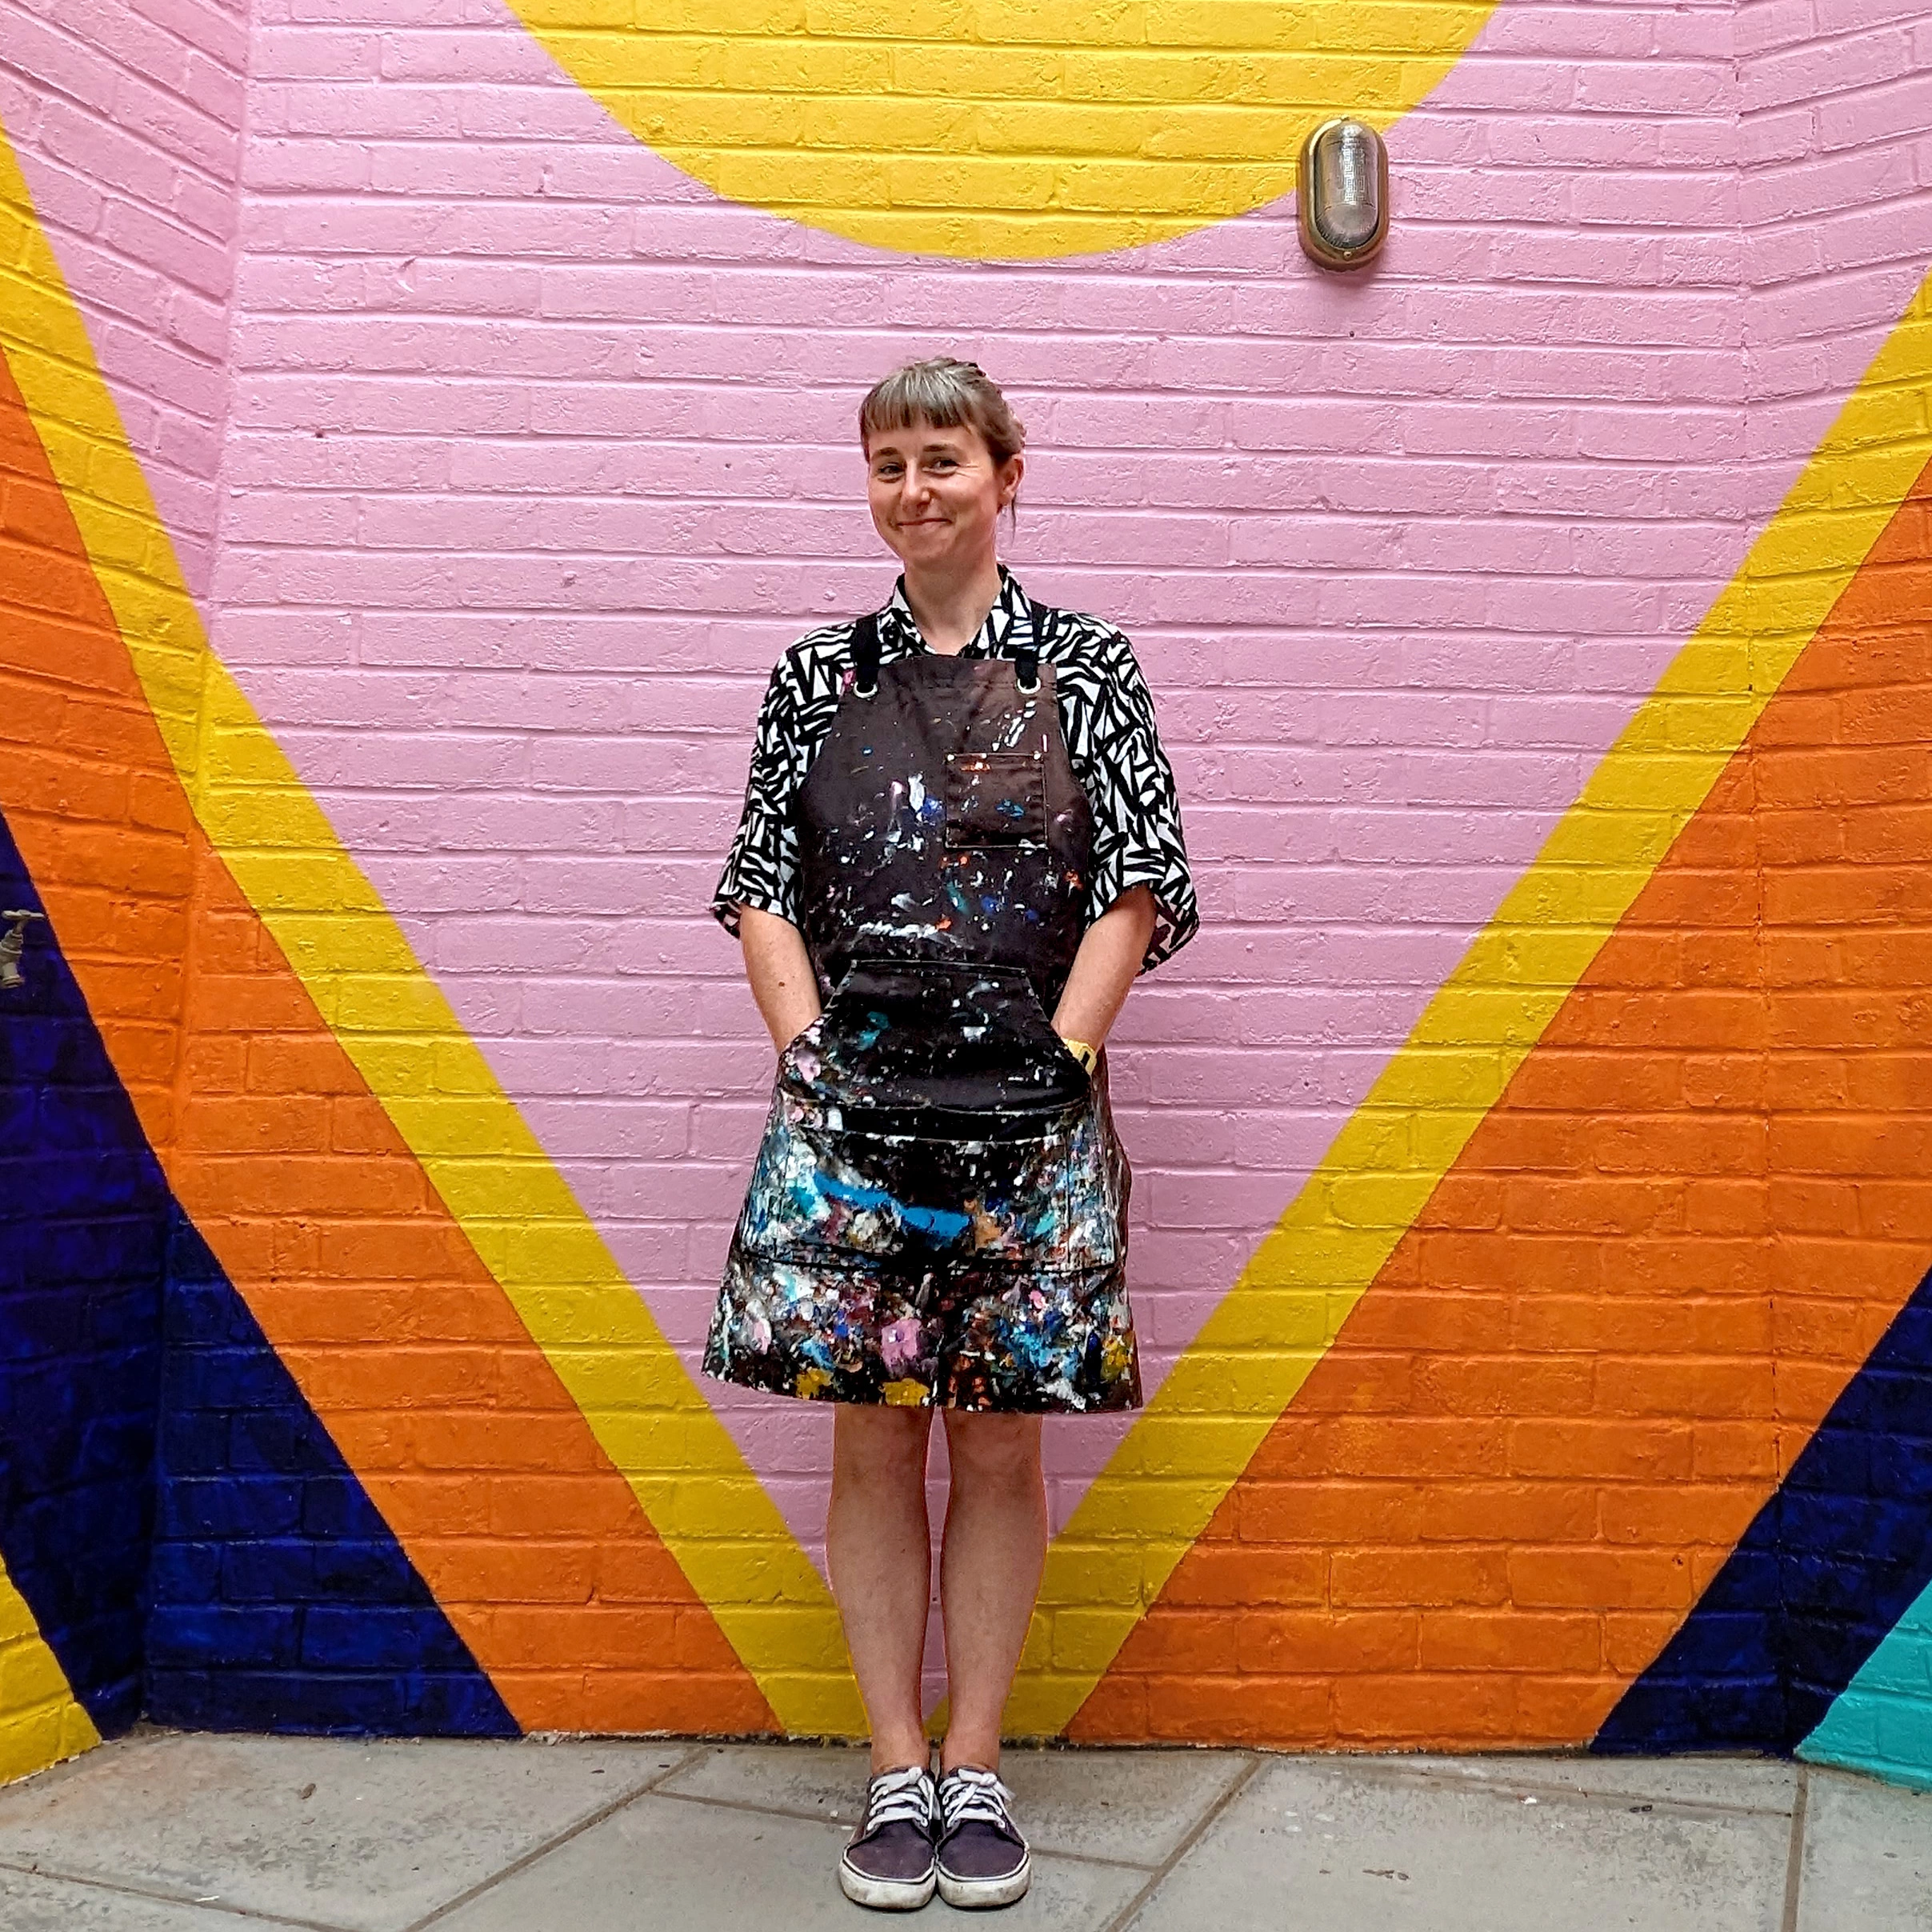 Artist Survival Techniques stands in front of a mural wall painted with a large pink triangle along with yellow, orange and blue and a yellow sun above